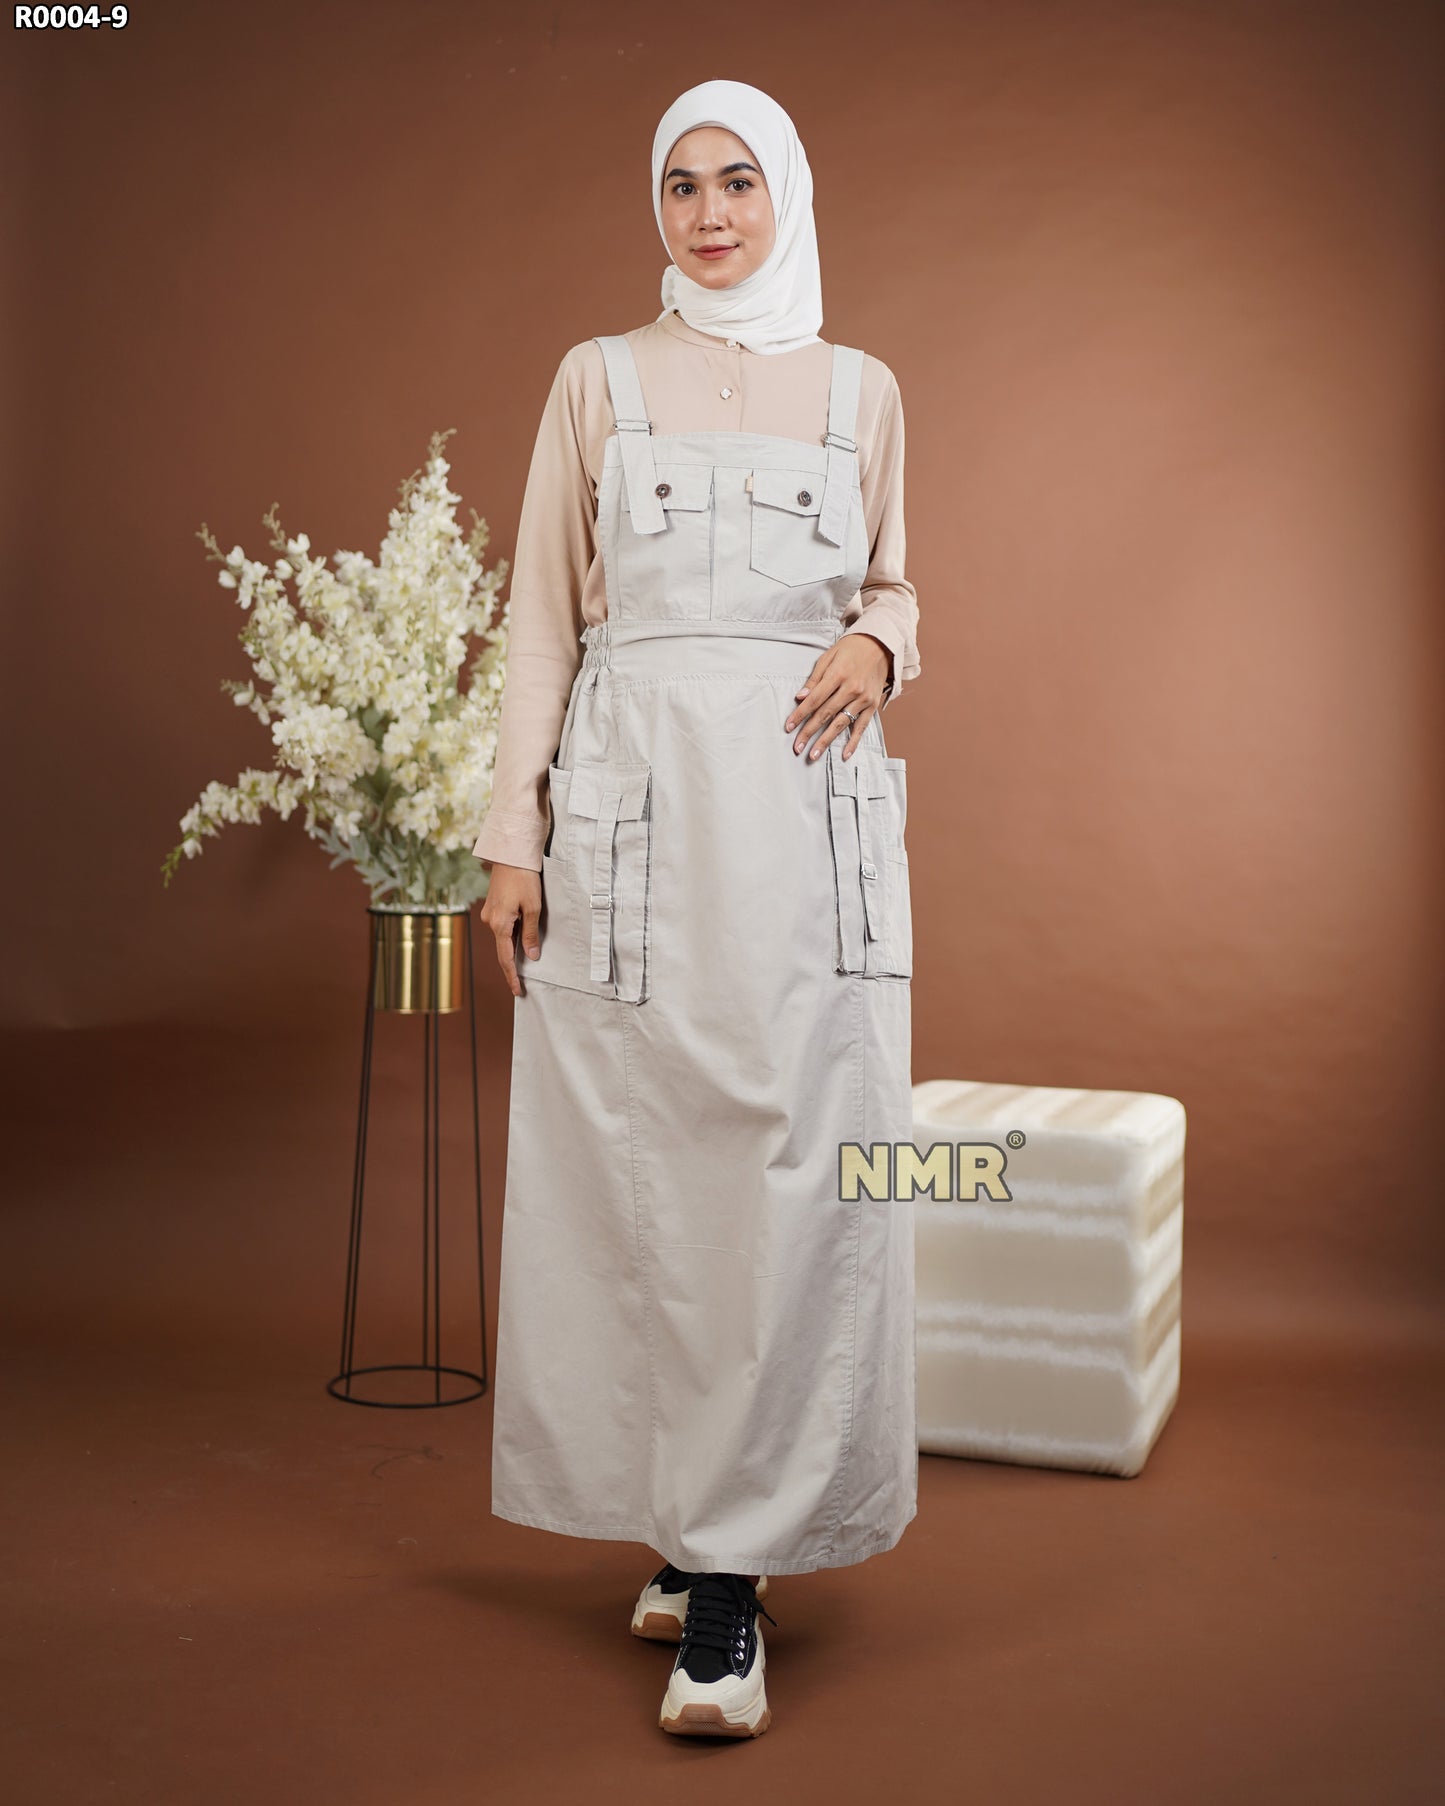 NMR Gamis Jumpsuit Overall Baby Canvas Vol R004-9